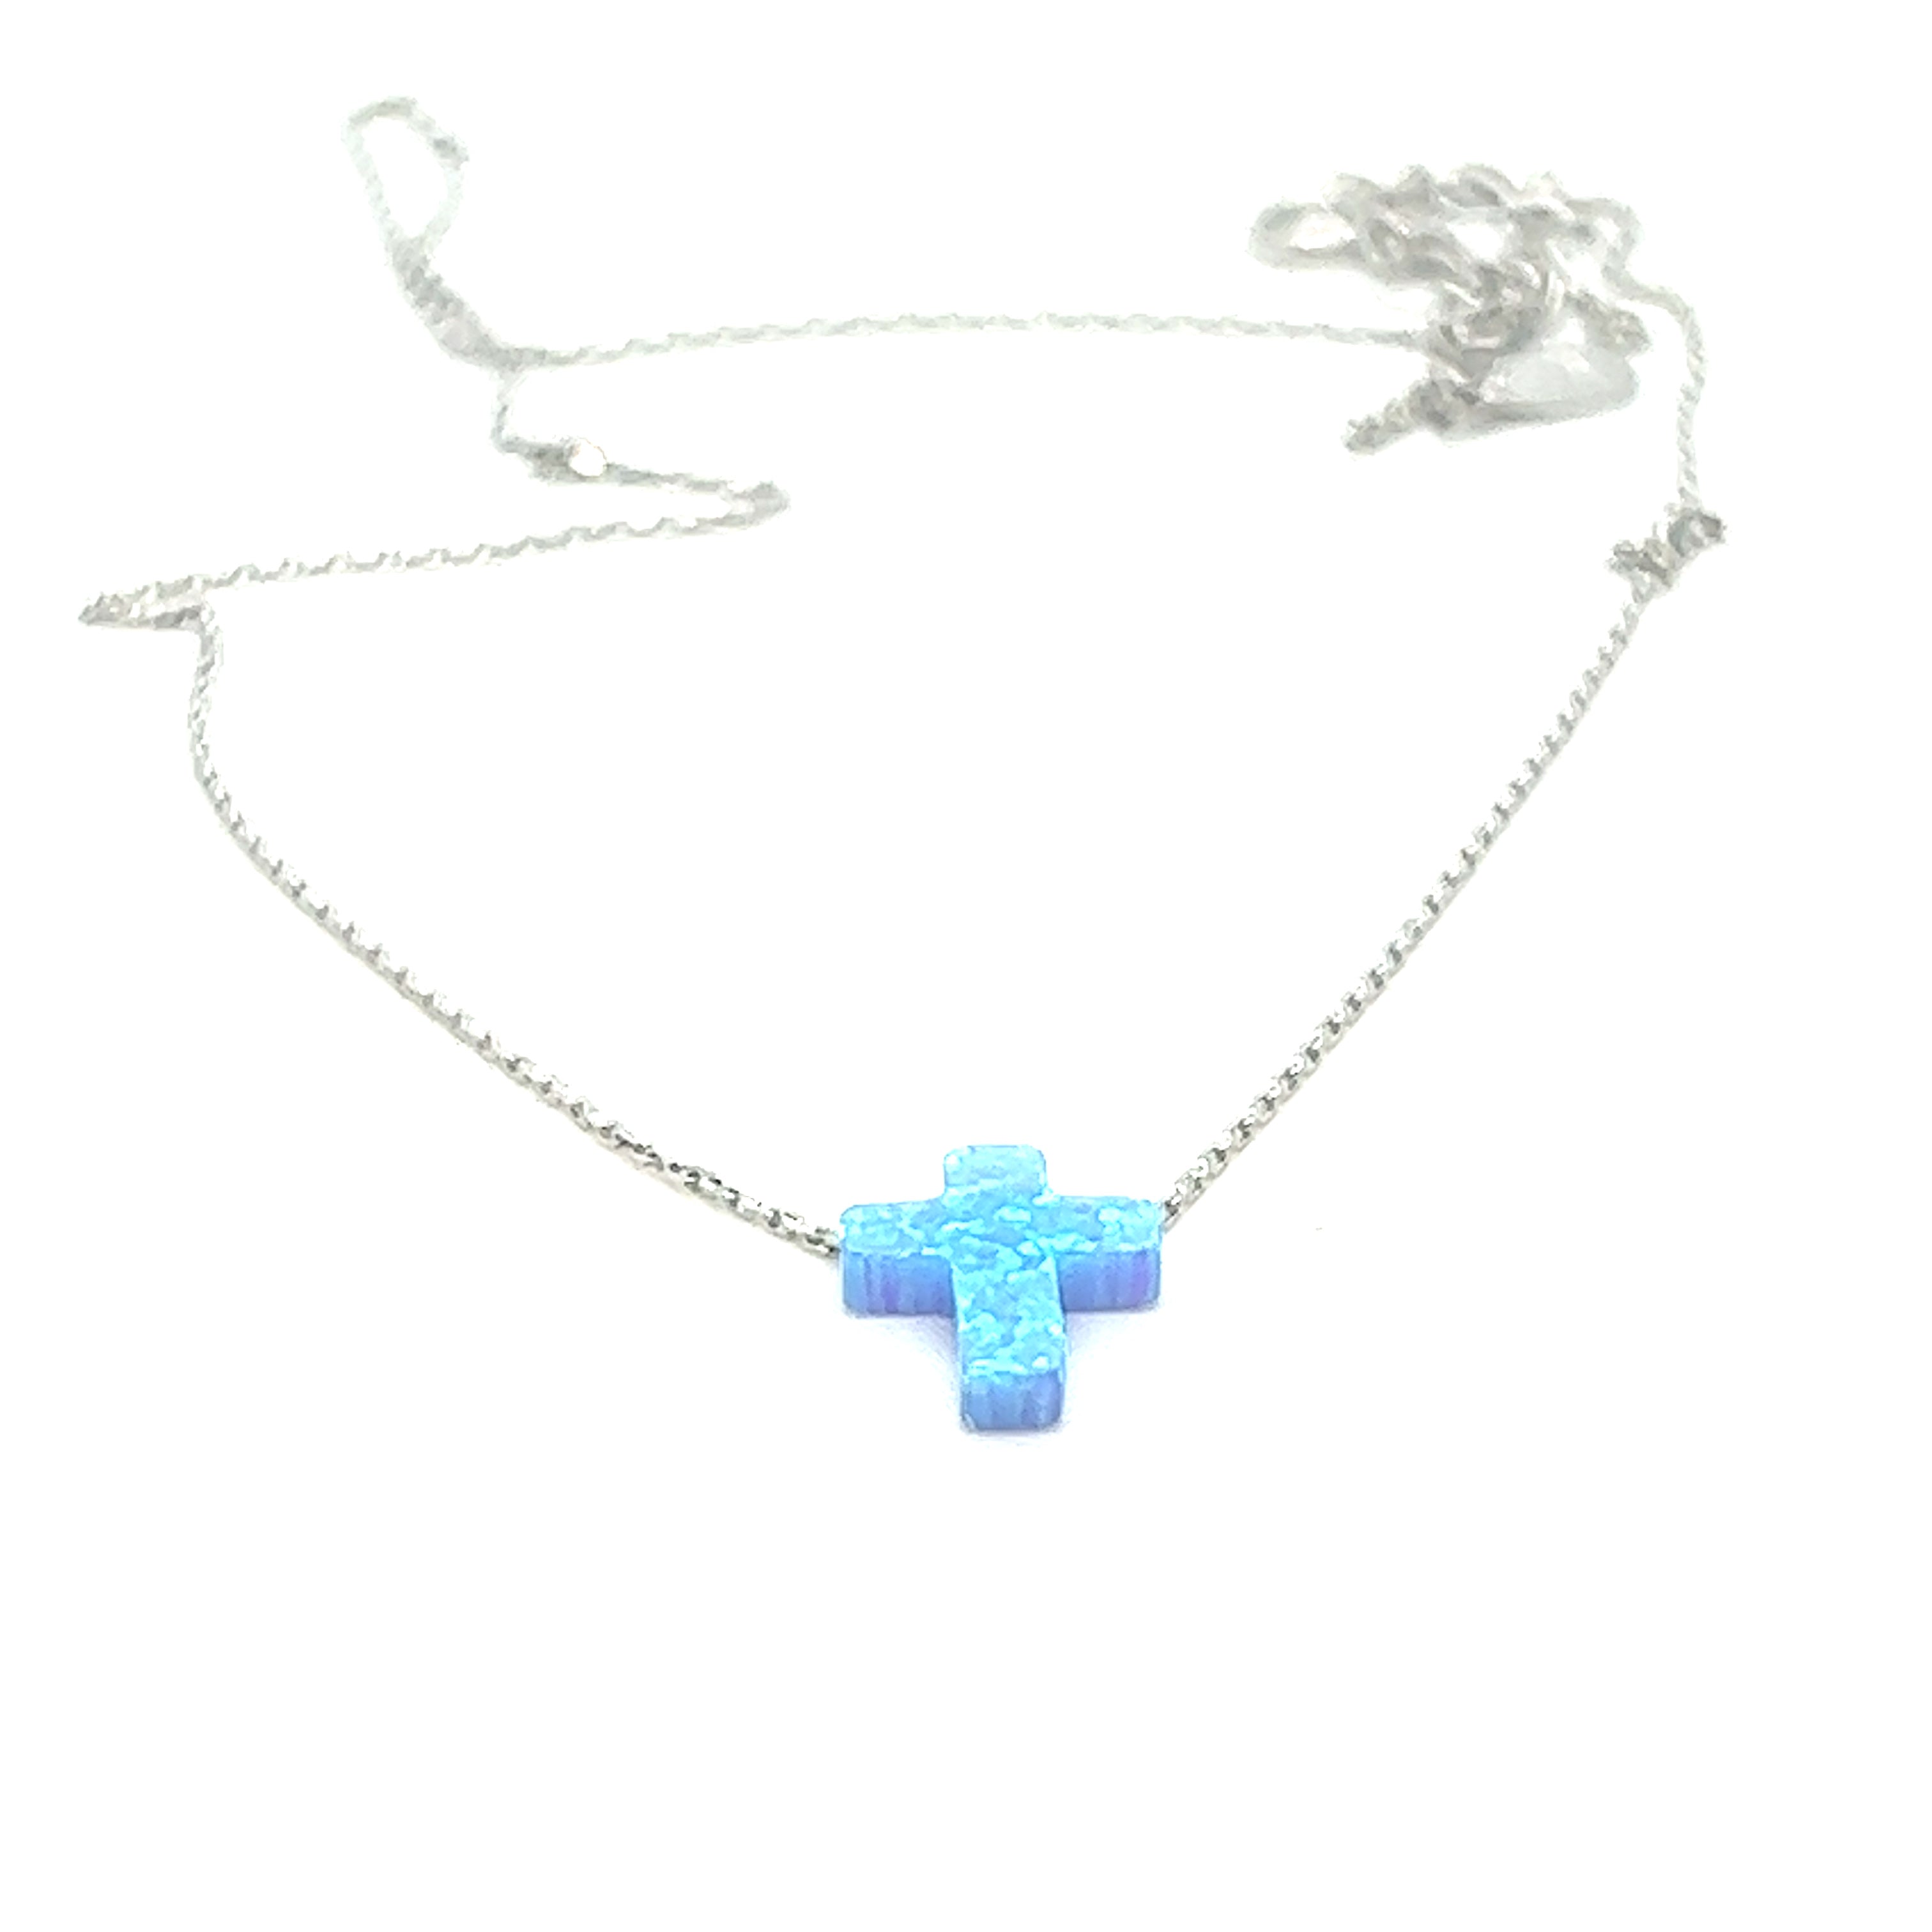 New Blue Fire Opal Cross Necklace with Rhinestone Crystals on Silver chain  | eBay